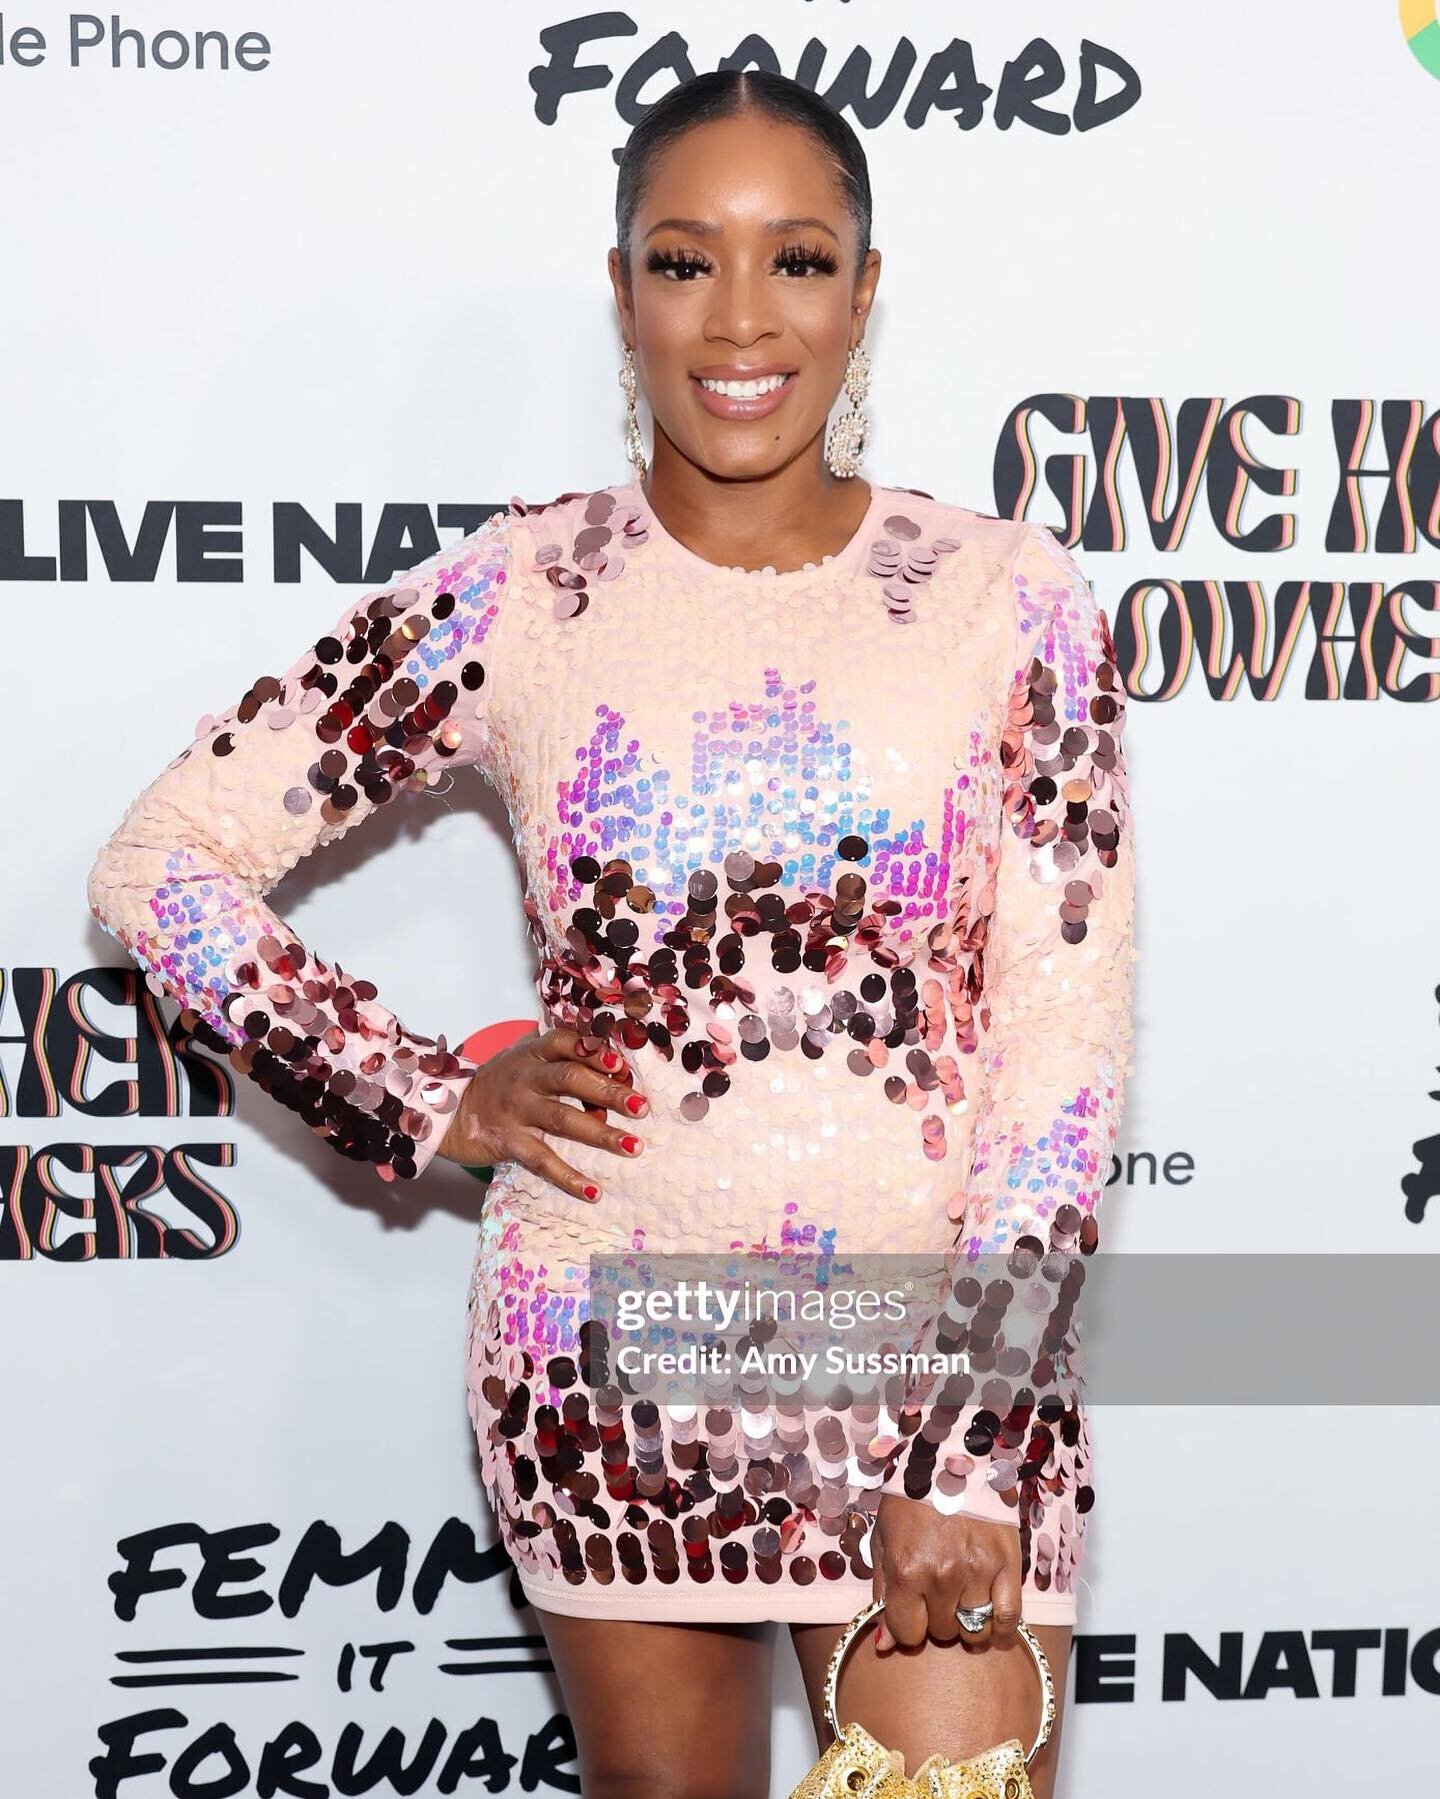 Gratitude in abundance for the incredible #GiveHerFlowHers Awards Show. A celebration of empowerment, resilience, and the phenomenal strength of Women out on by @heatherlowery *Thank you for recognizing and uplifting the voices that inspire change. I